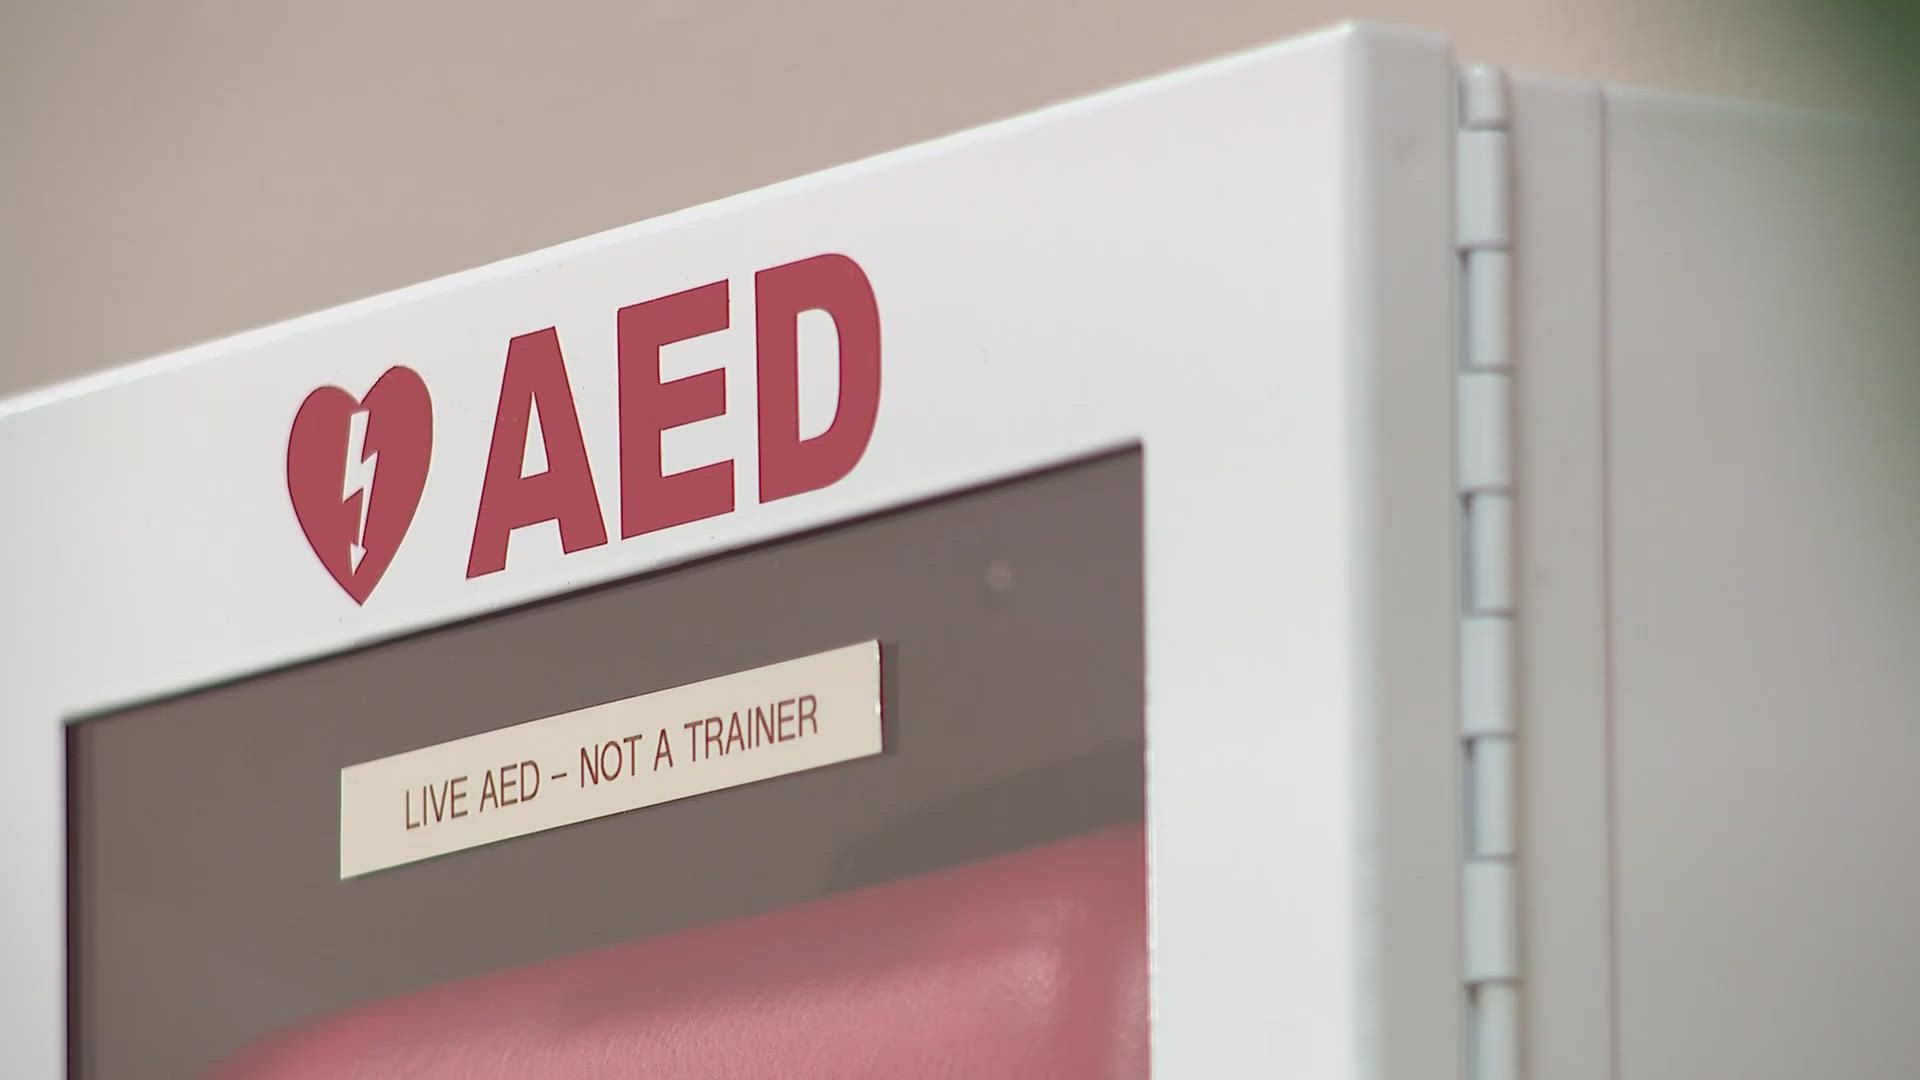 Nearly 30 states have AED mandates that certain businesses have these life-saving boxes. Ohio is not one of them.